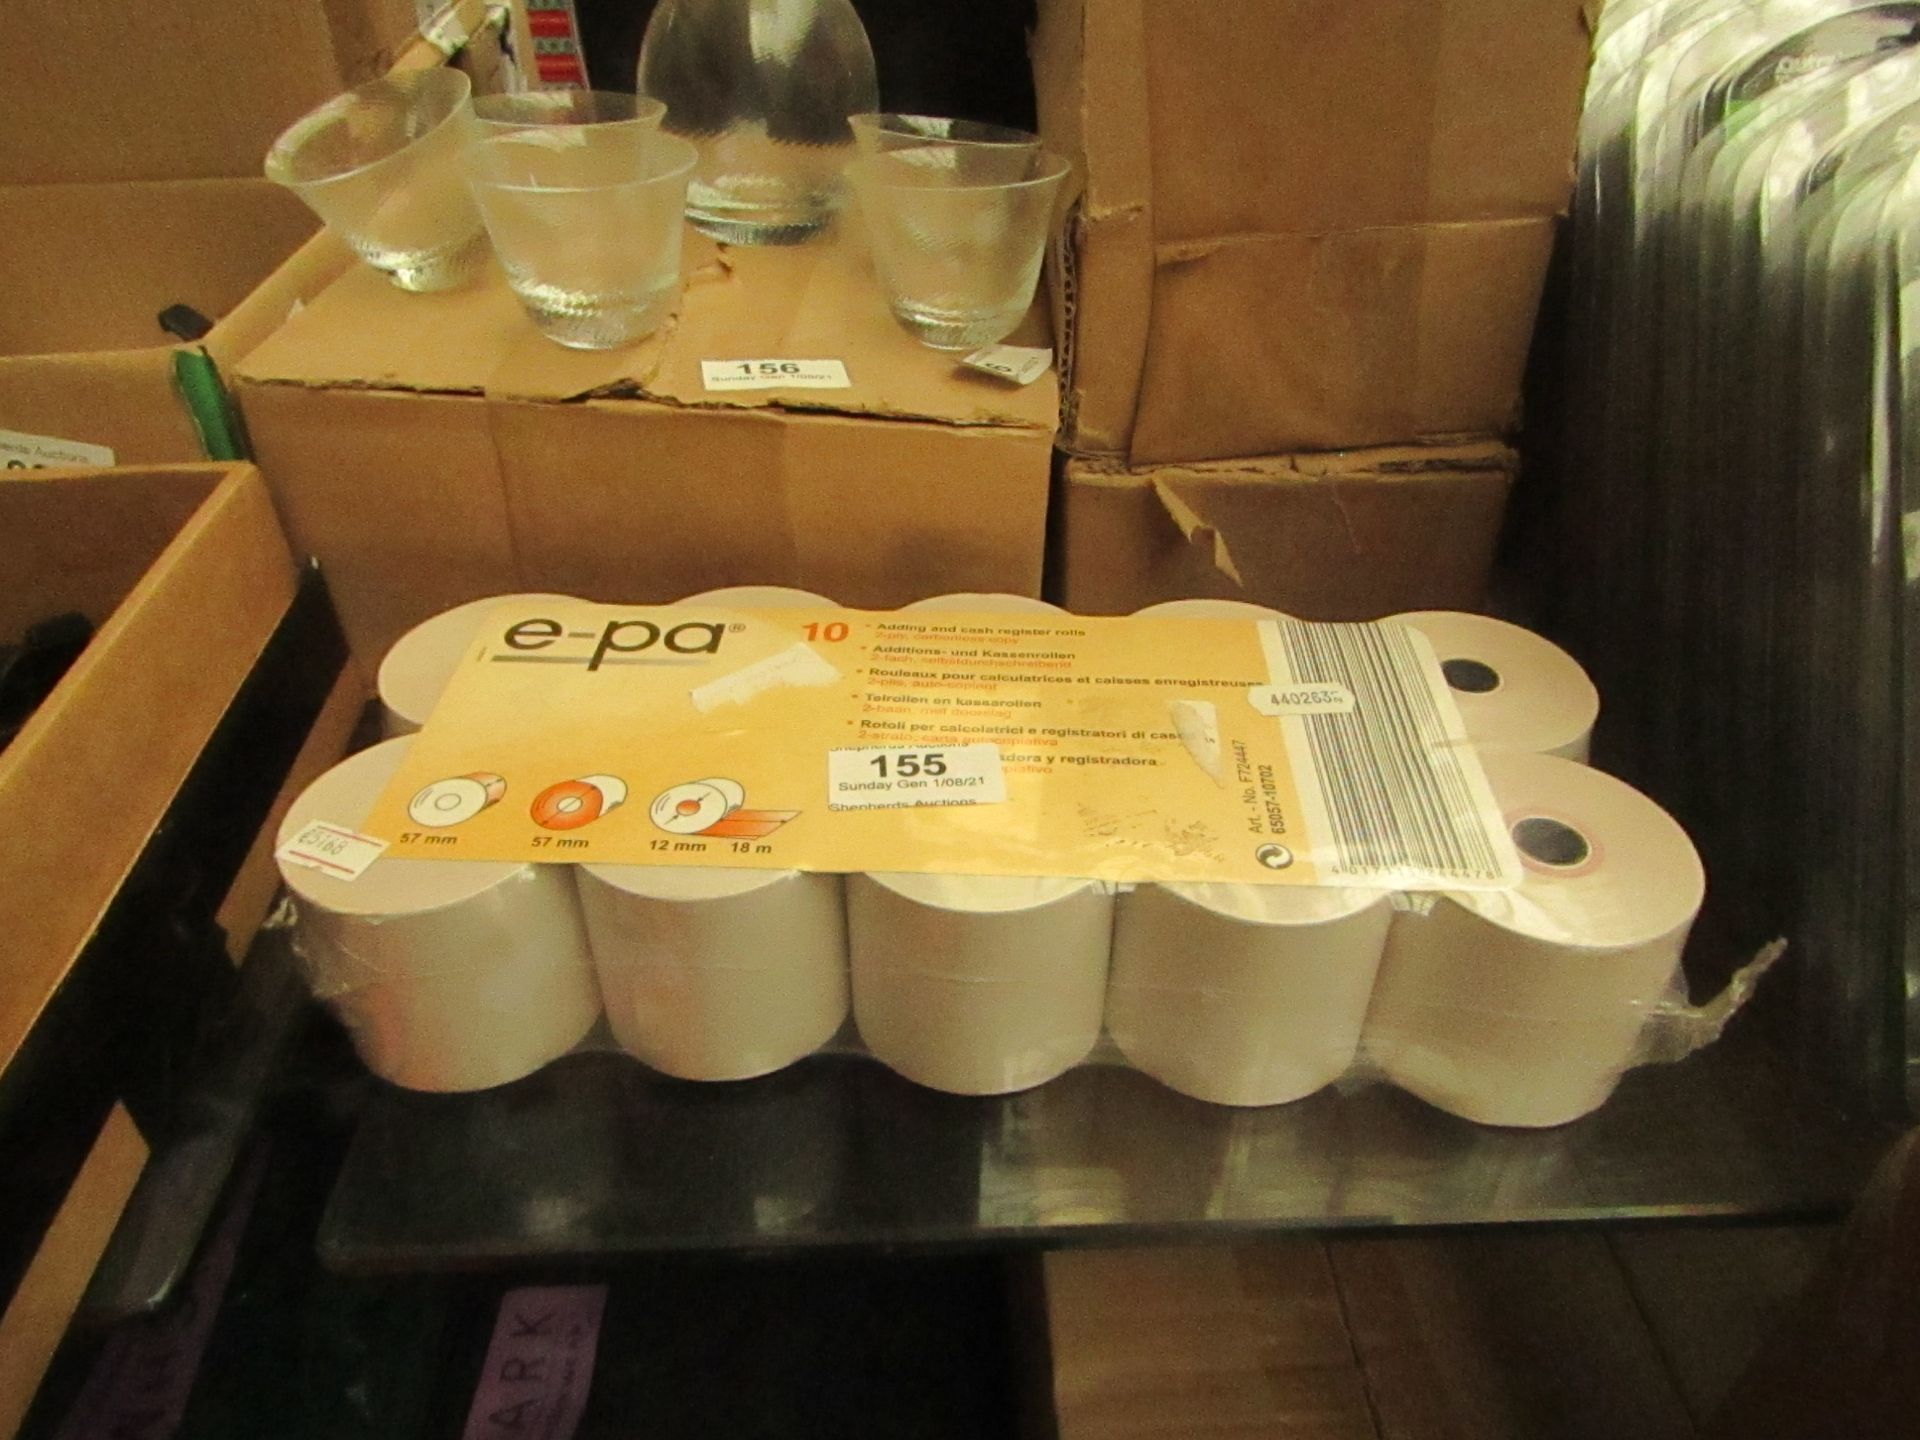 10x E-pa Adding & Cash Register Rolls - New & Packaged.